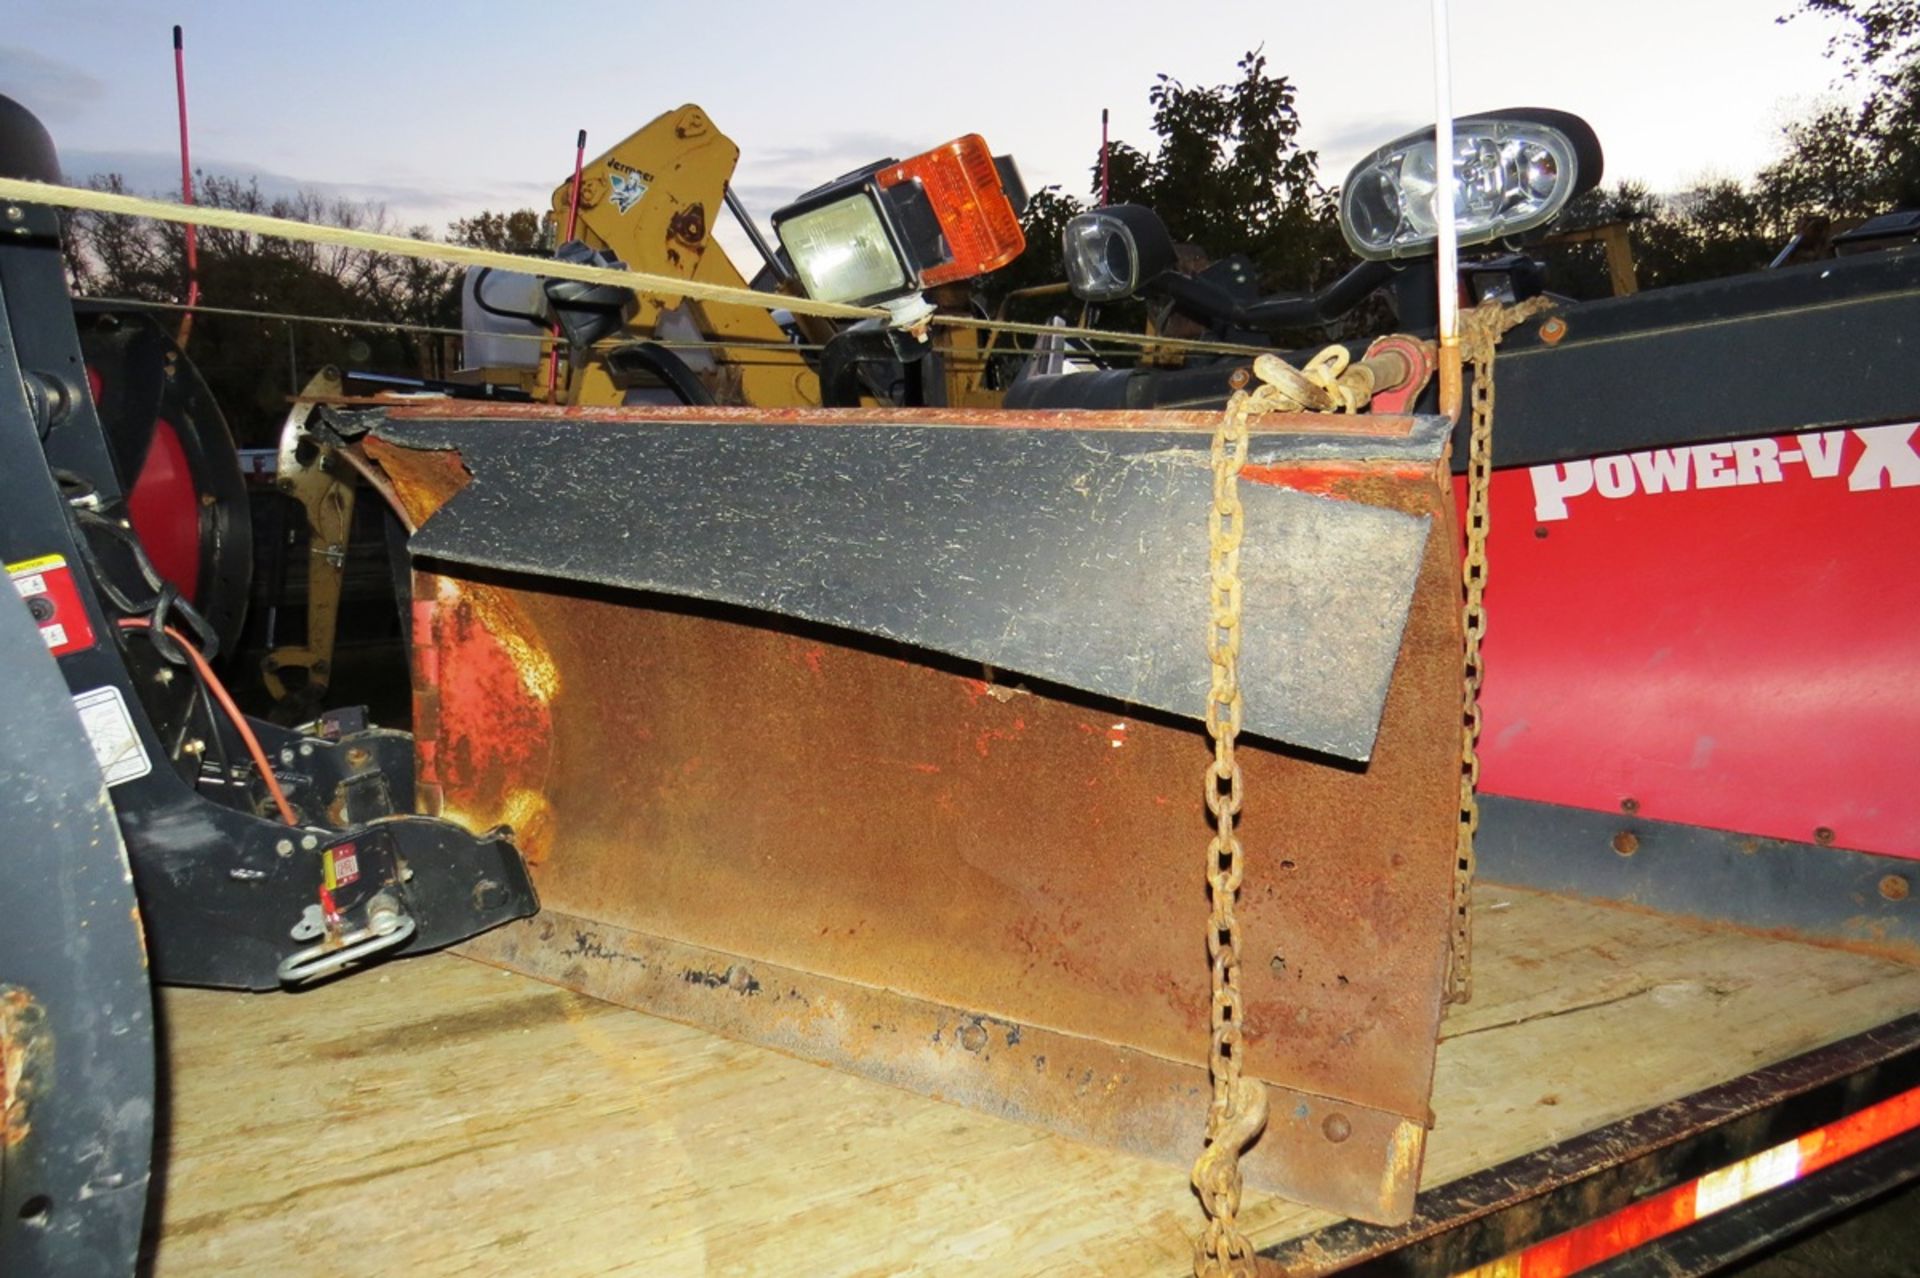 Hiniker V-Blade Attachment for Pickups, 8’6” Width, Hydraulic Lift & V-Angle, Powder Guard, Light - Image 3 of 5